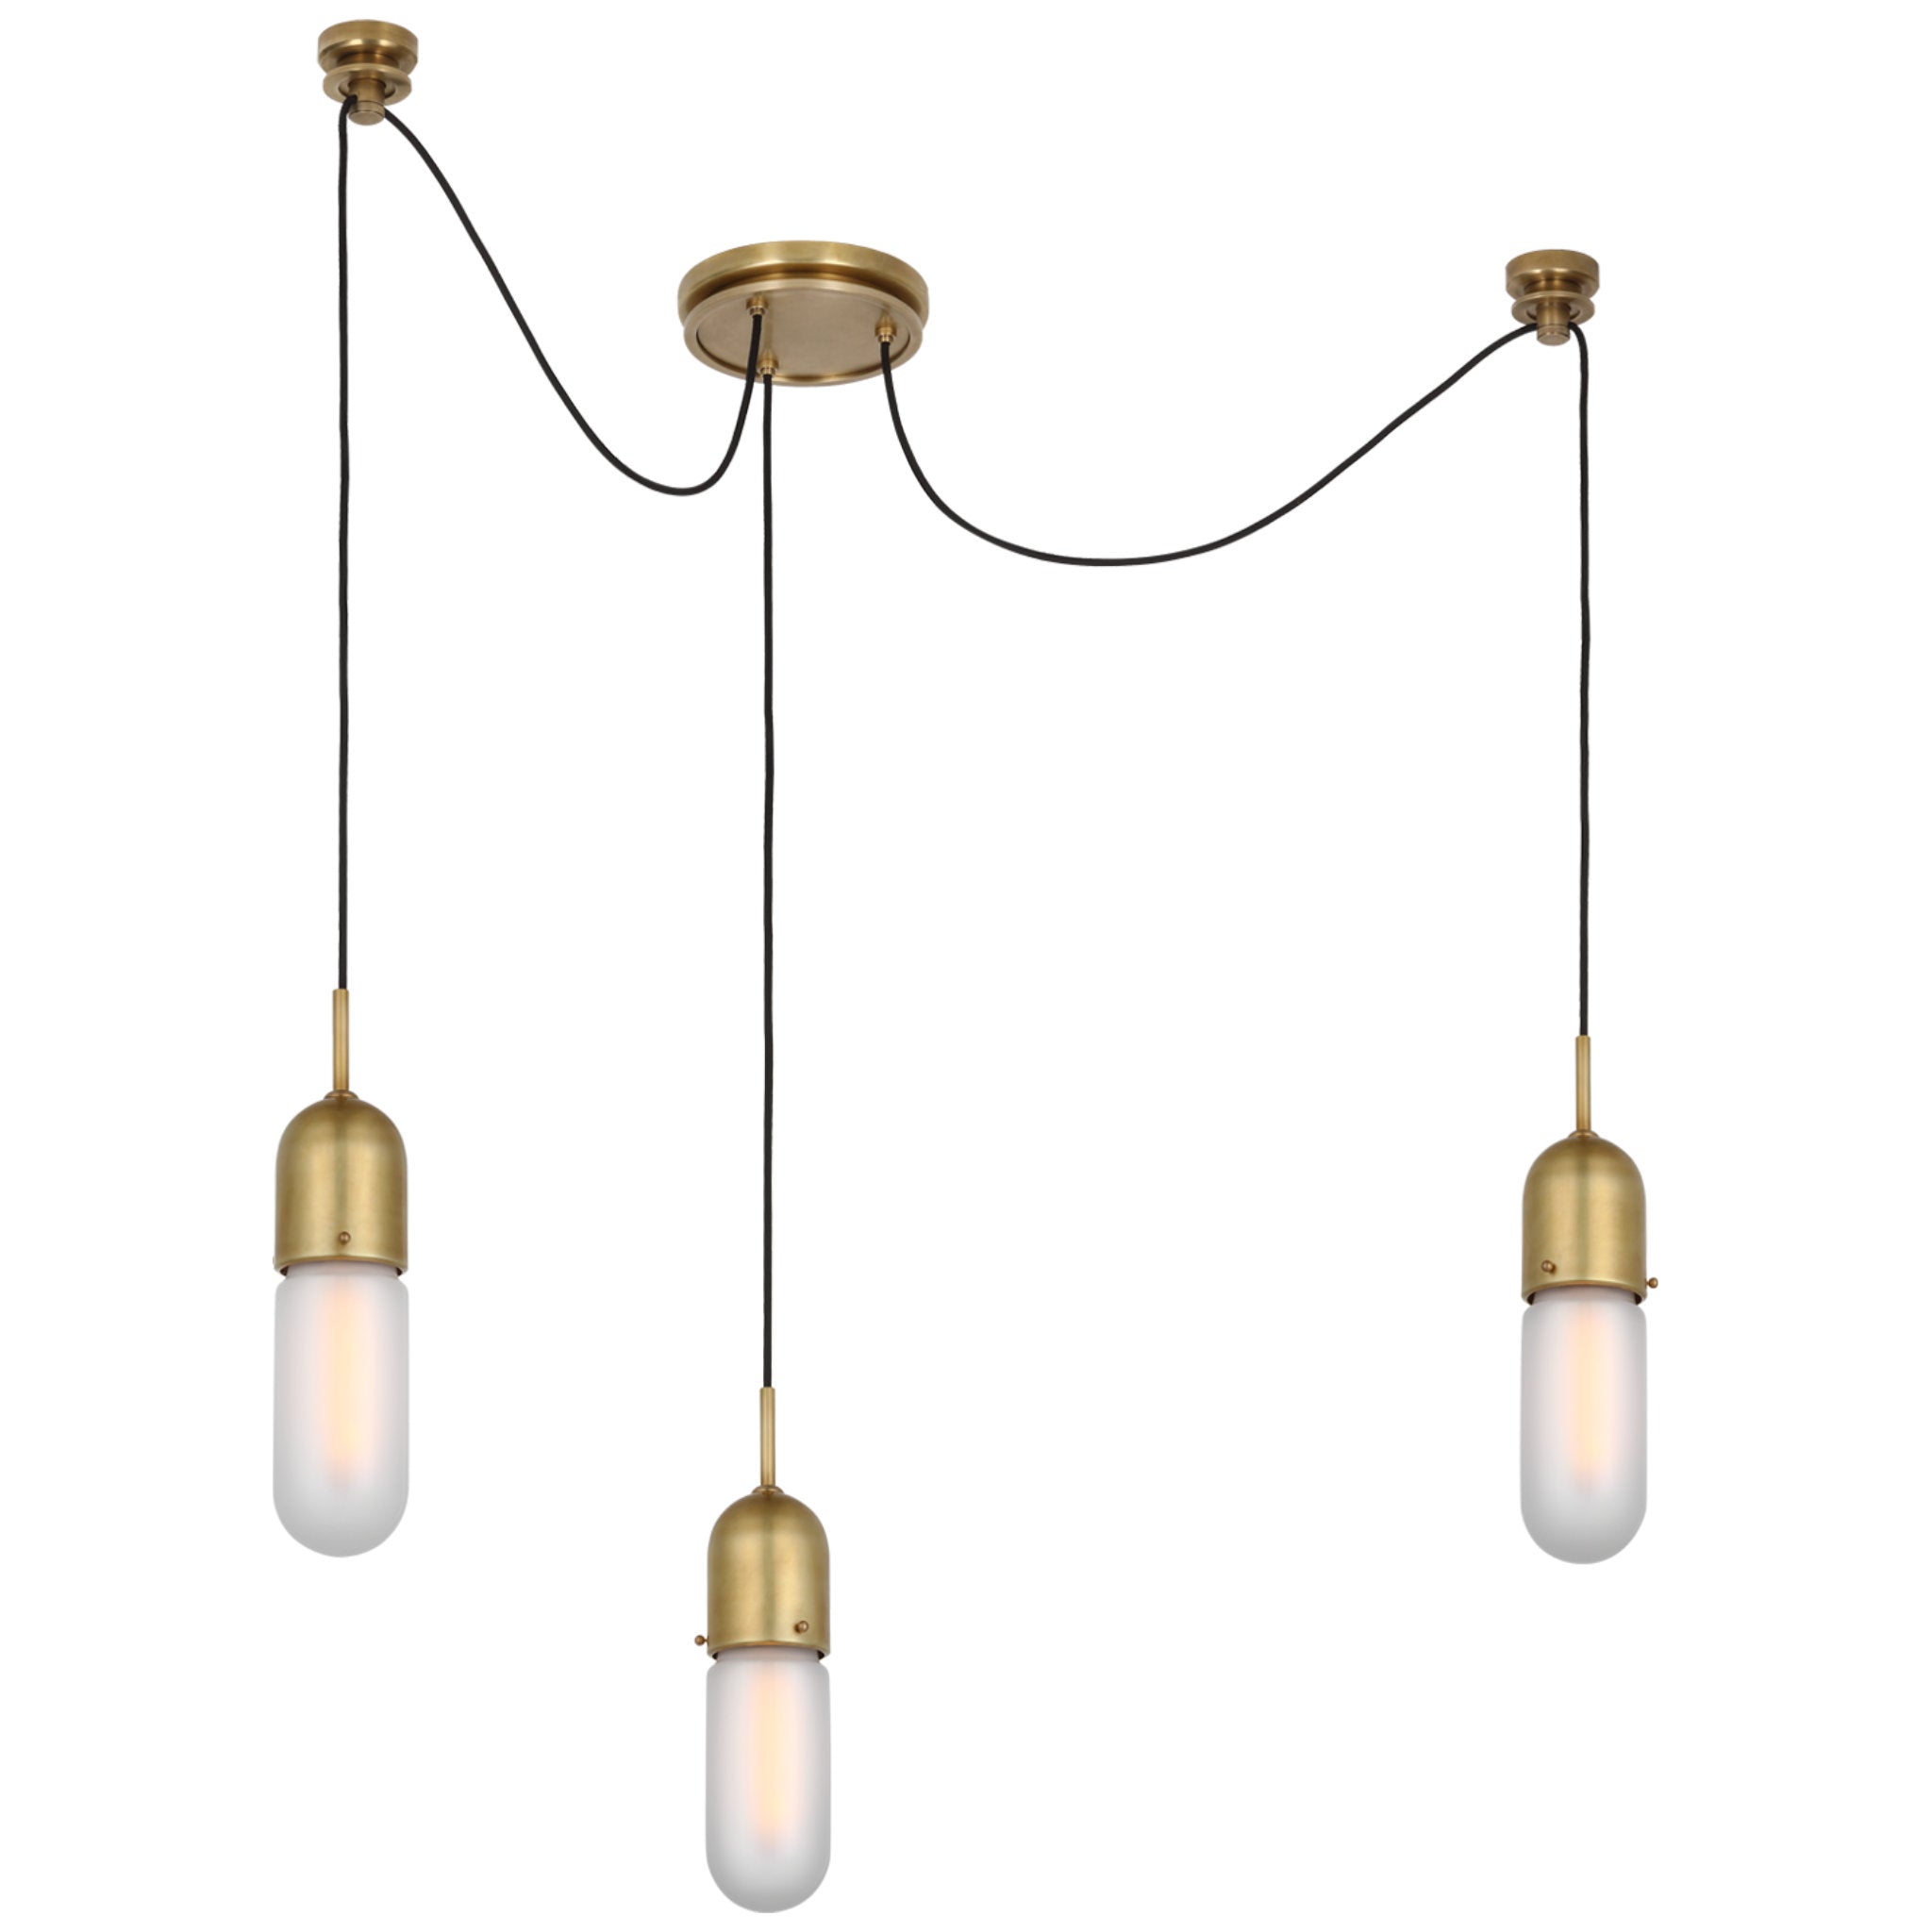 Thomas O'Brien Junio 3-Light Chandelier in Hand-Rubbed Antique Brass with Frosted Glass